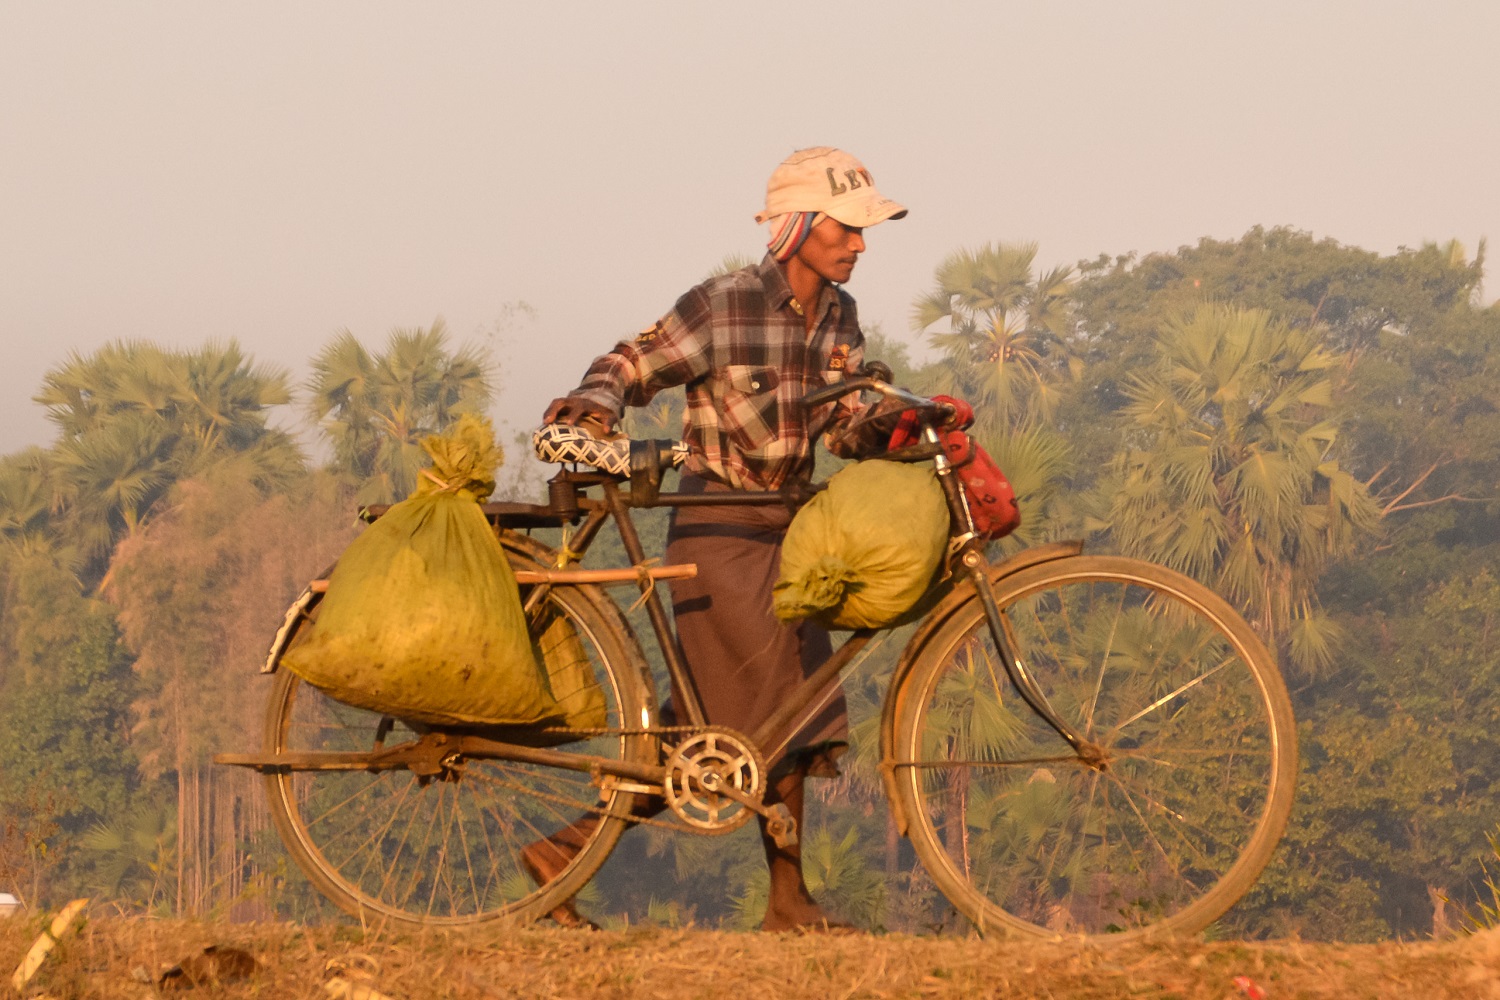 Man with bicycle in Myanmar